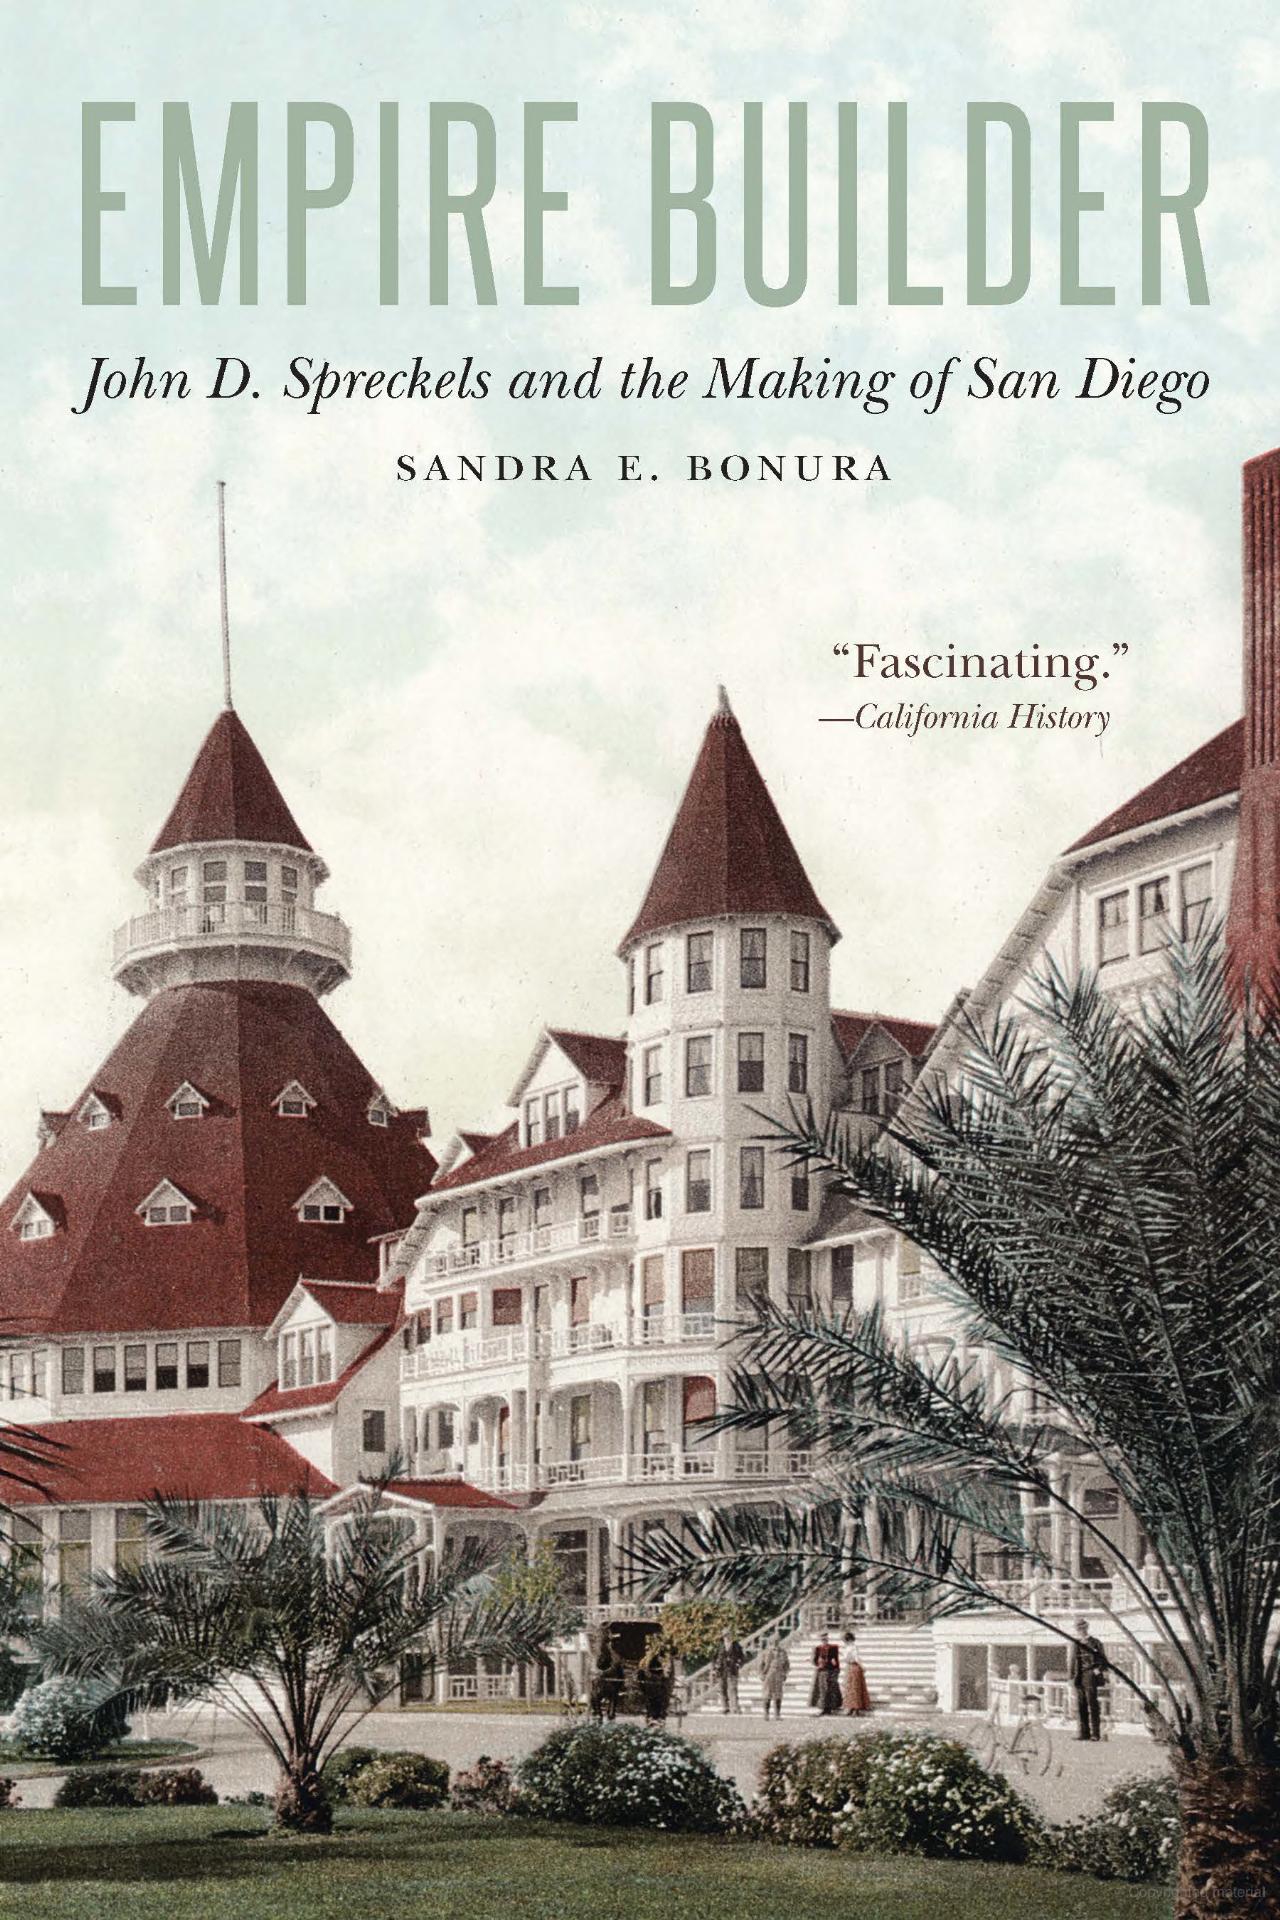 Cover of the book Empire Builder: John D. Spreckels and the Making of San Diego, featuring the Hotel Del Coronado